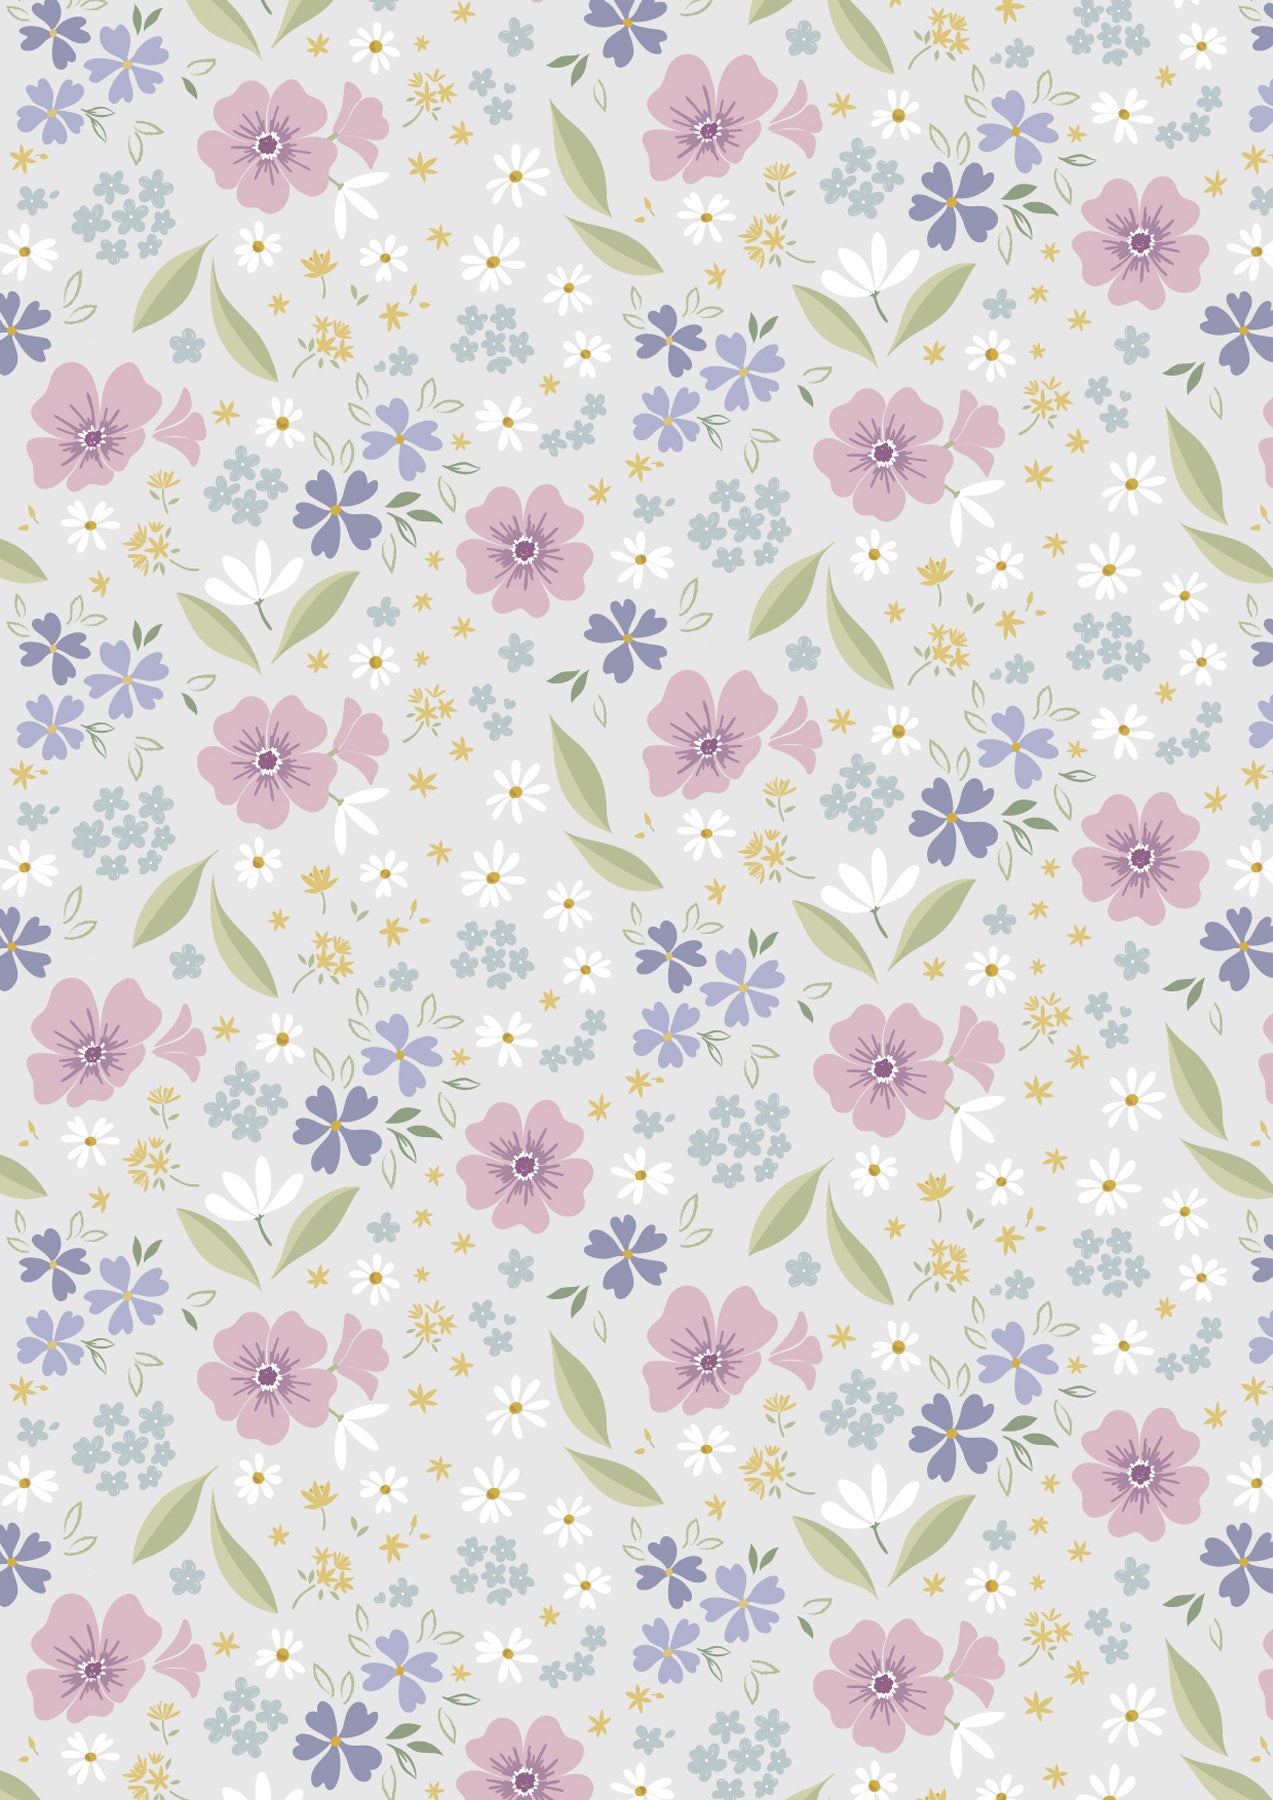 Floral Art on Pale Grey - Floral Song